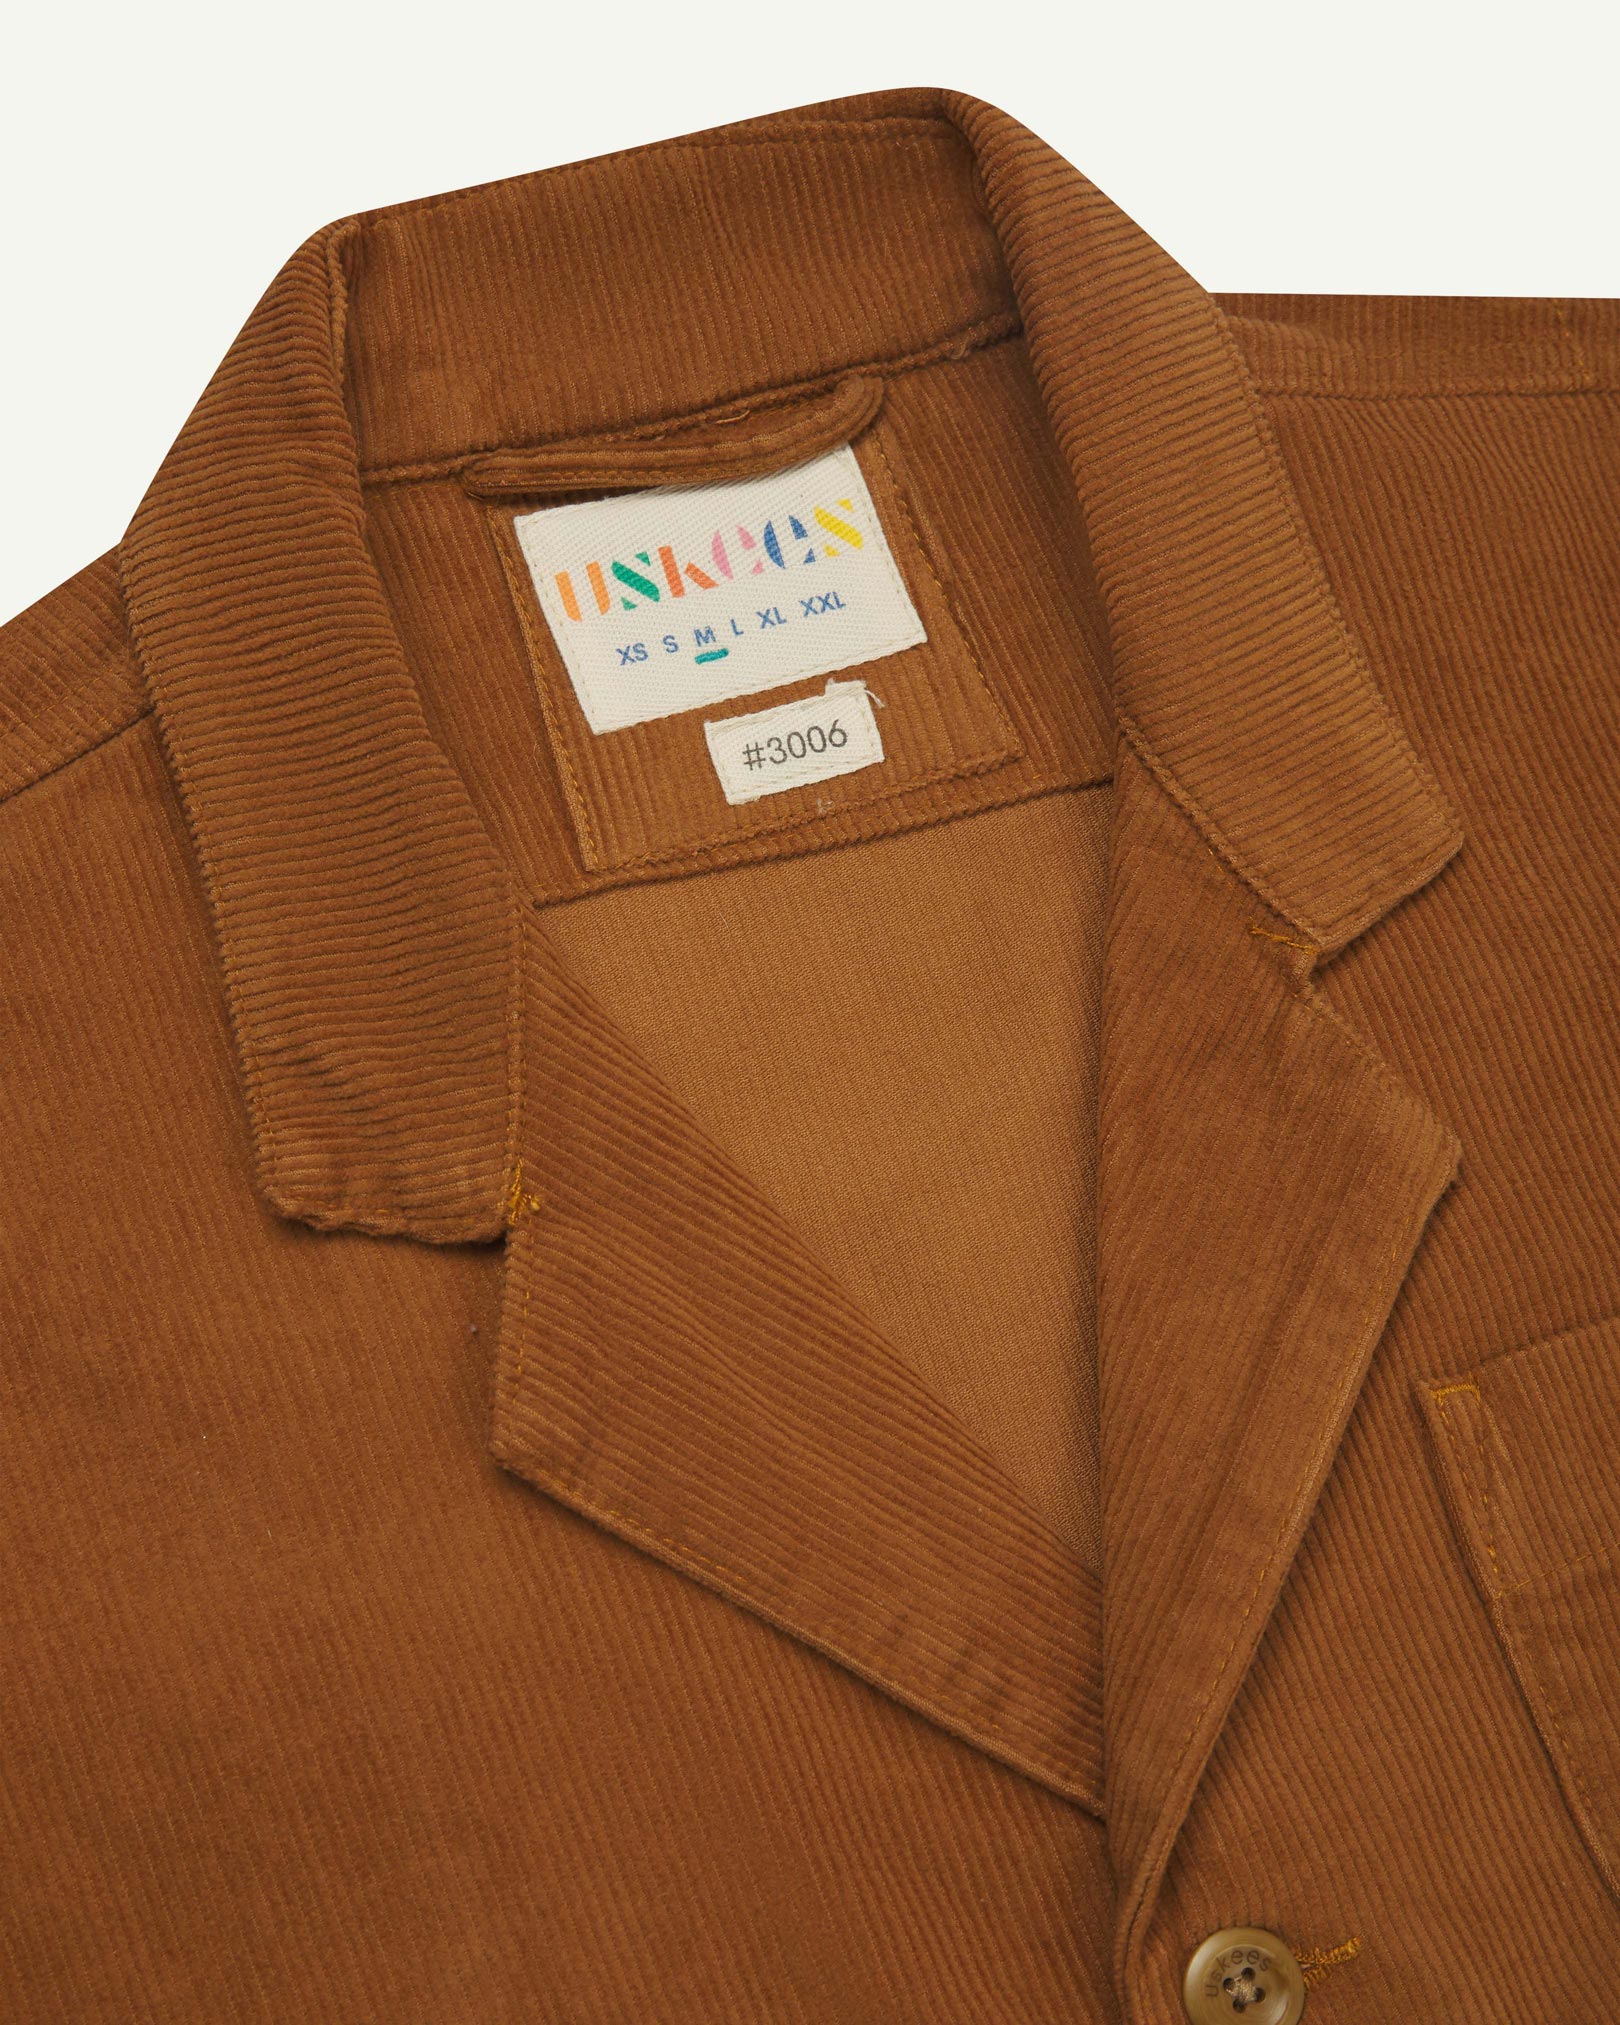 Close-up front view of organic cord tan blazer showing the collar, lapels and Uskees brand label.